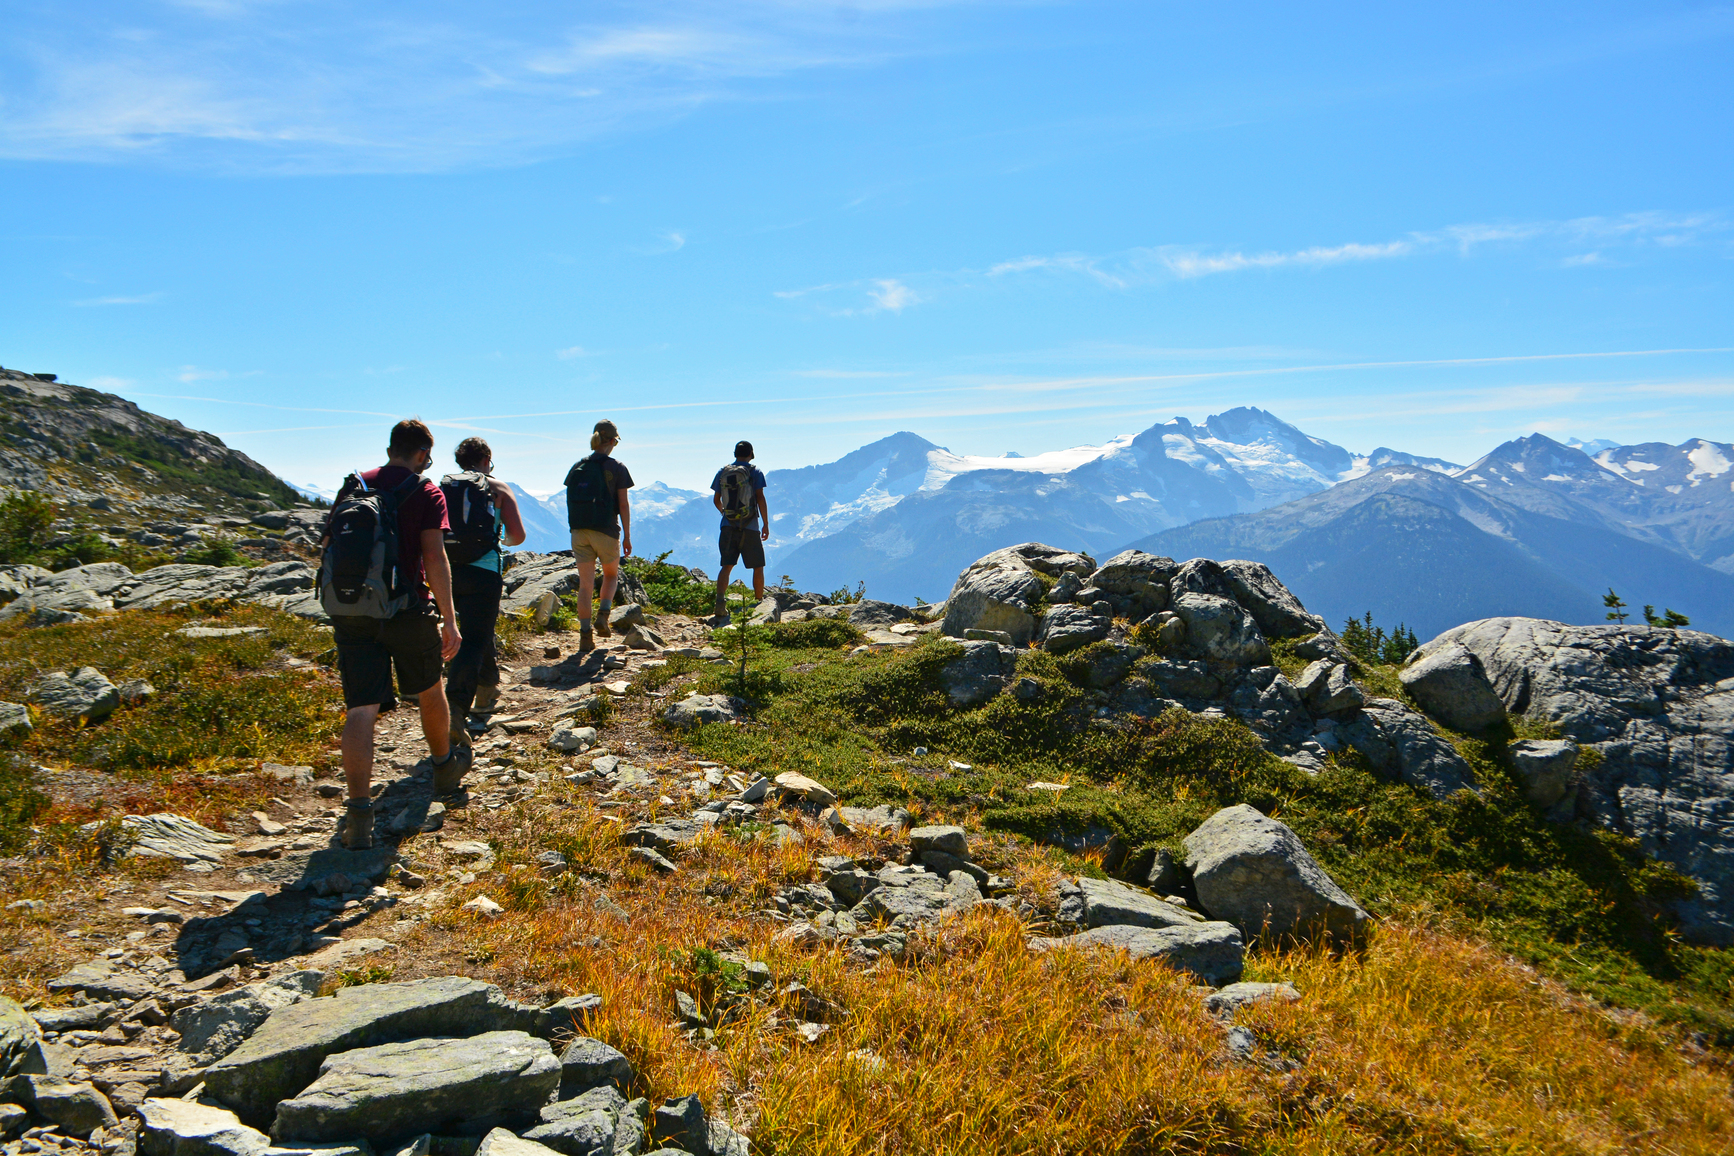 Hikers walking through rocky terrain and mountain views in the background.